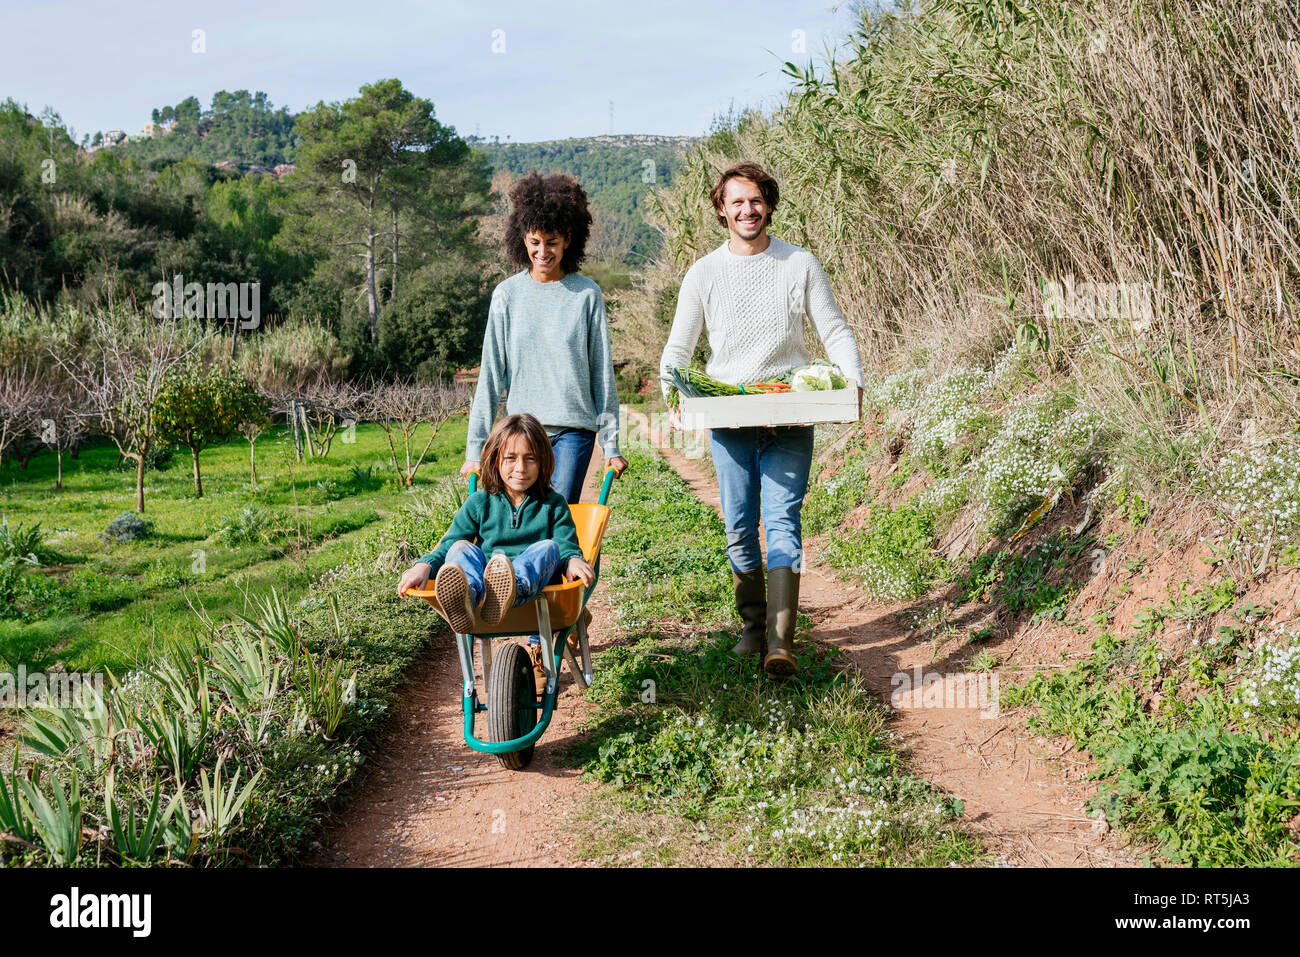 Family walking on a dirt track, pushing wheelbarrow, carrying crate with vegetables Stock Photo